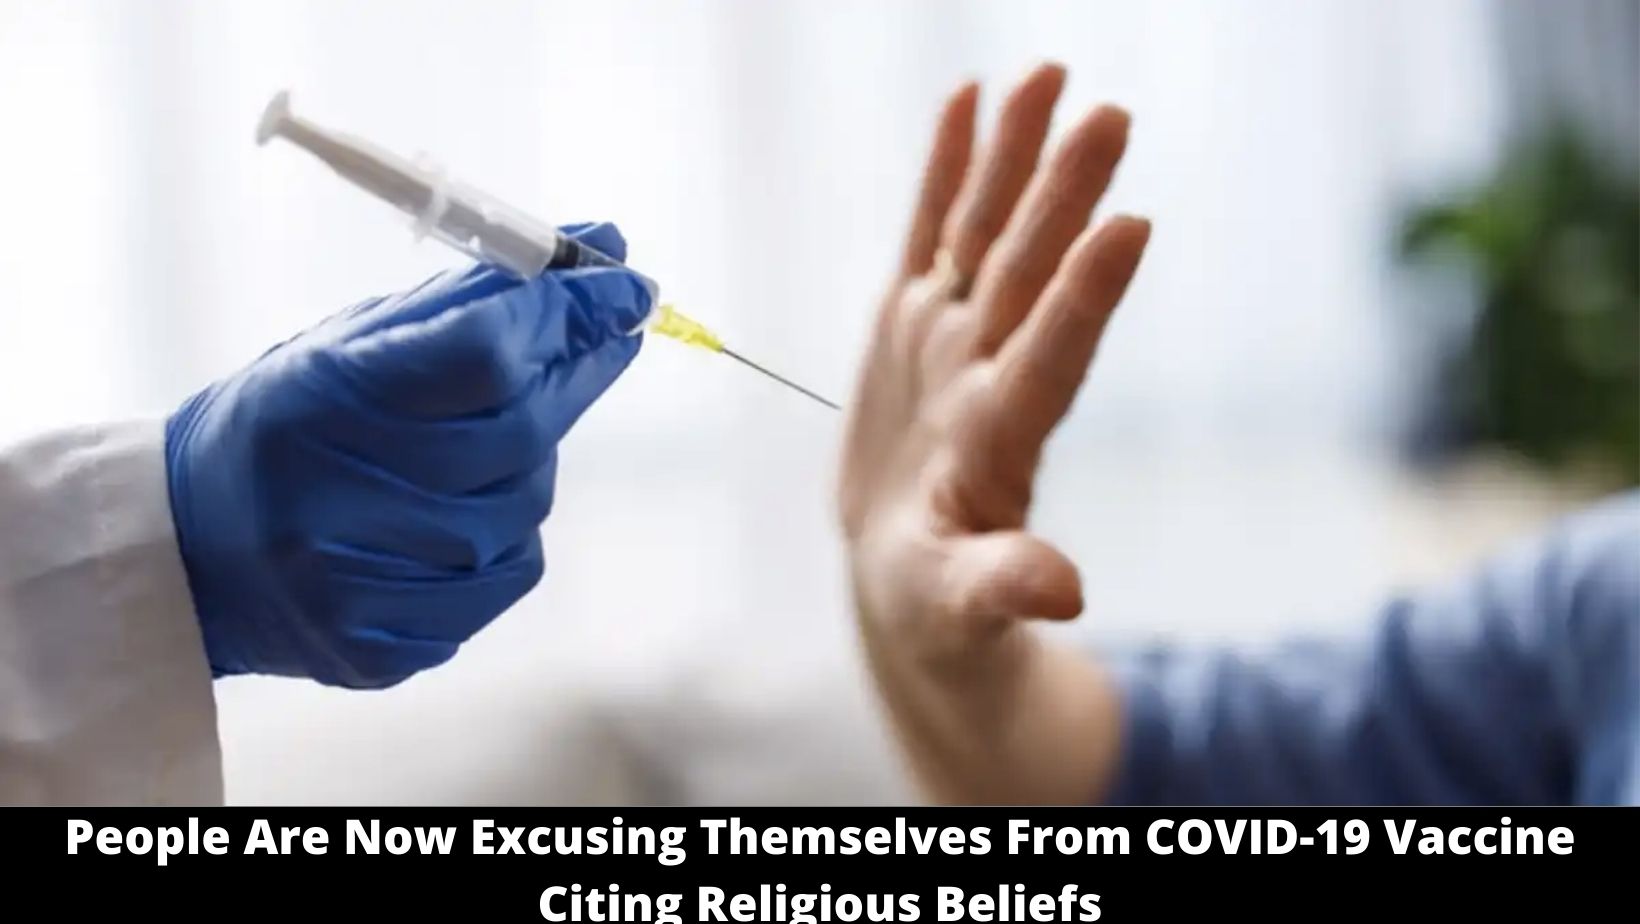 People Are Now Excusing Themselves From COVID-19 Vaccine Citing Religious Beliefs